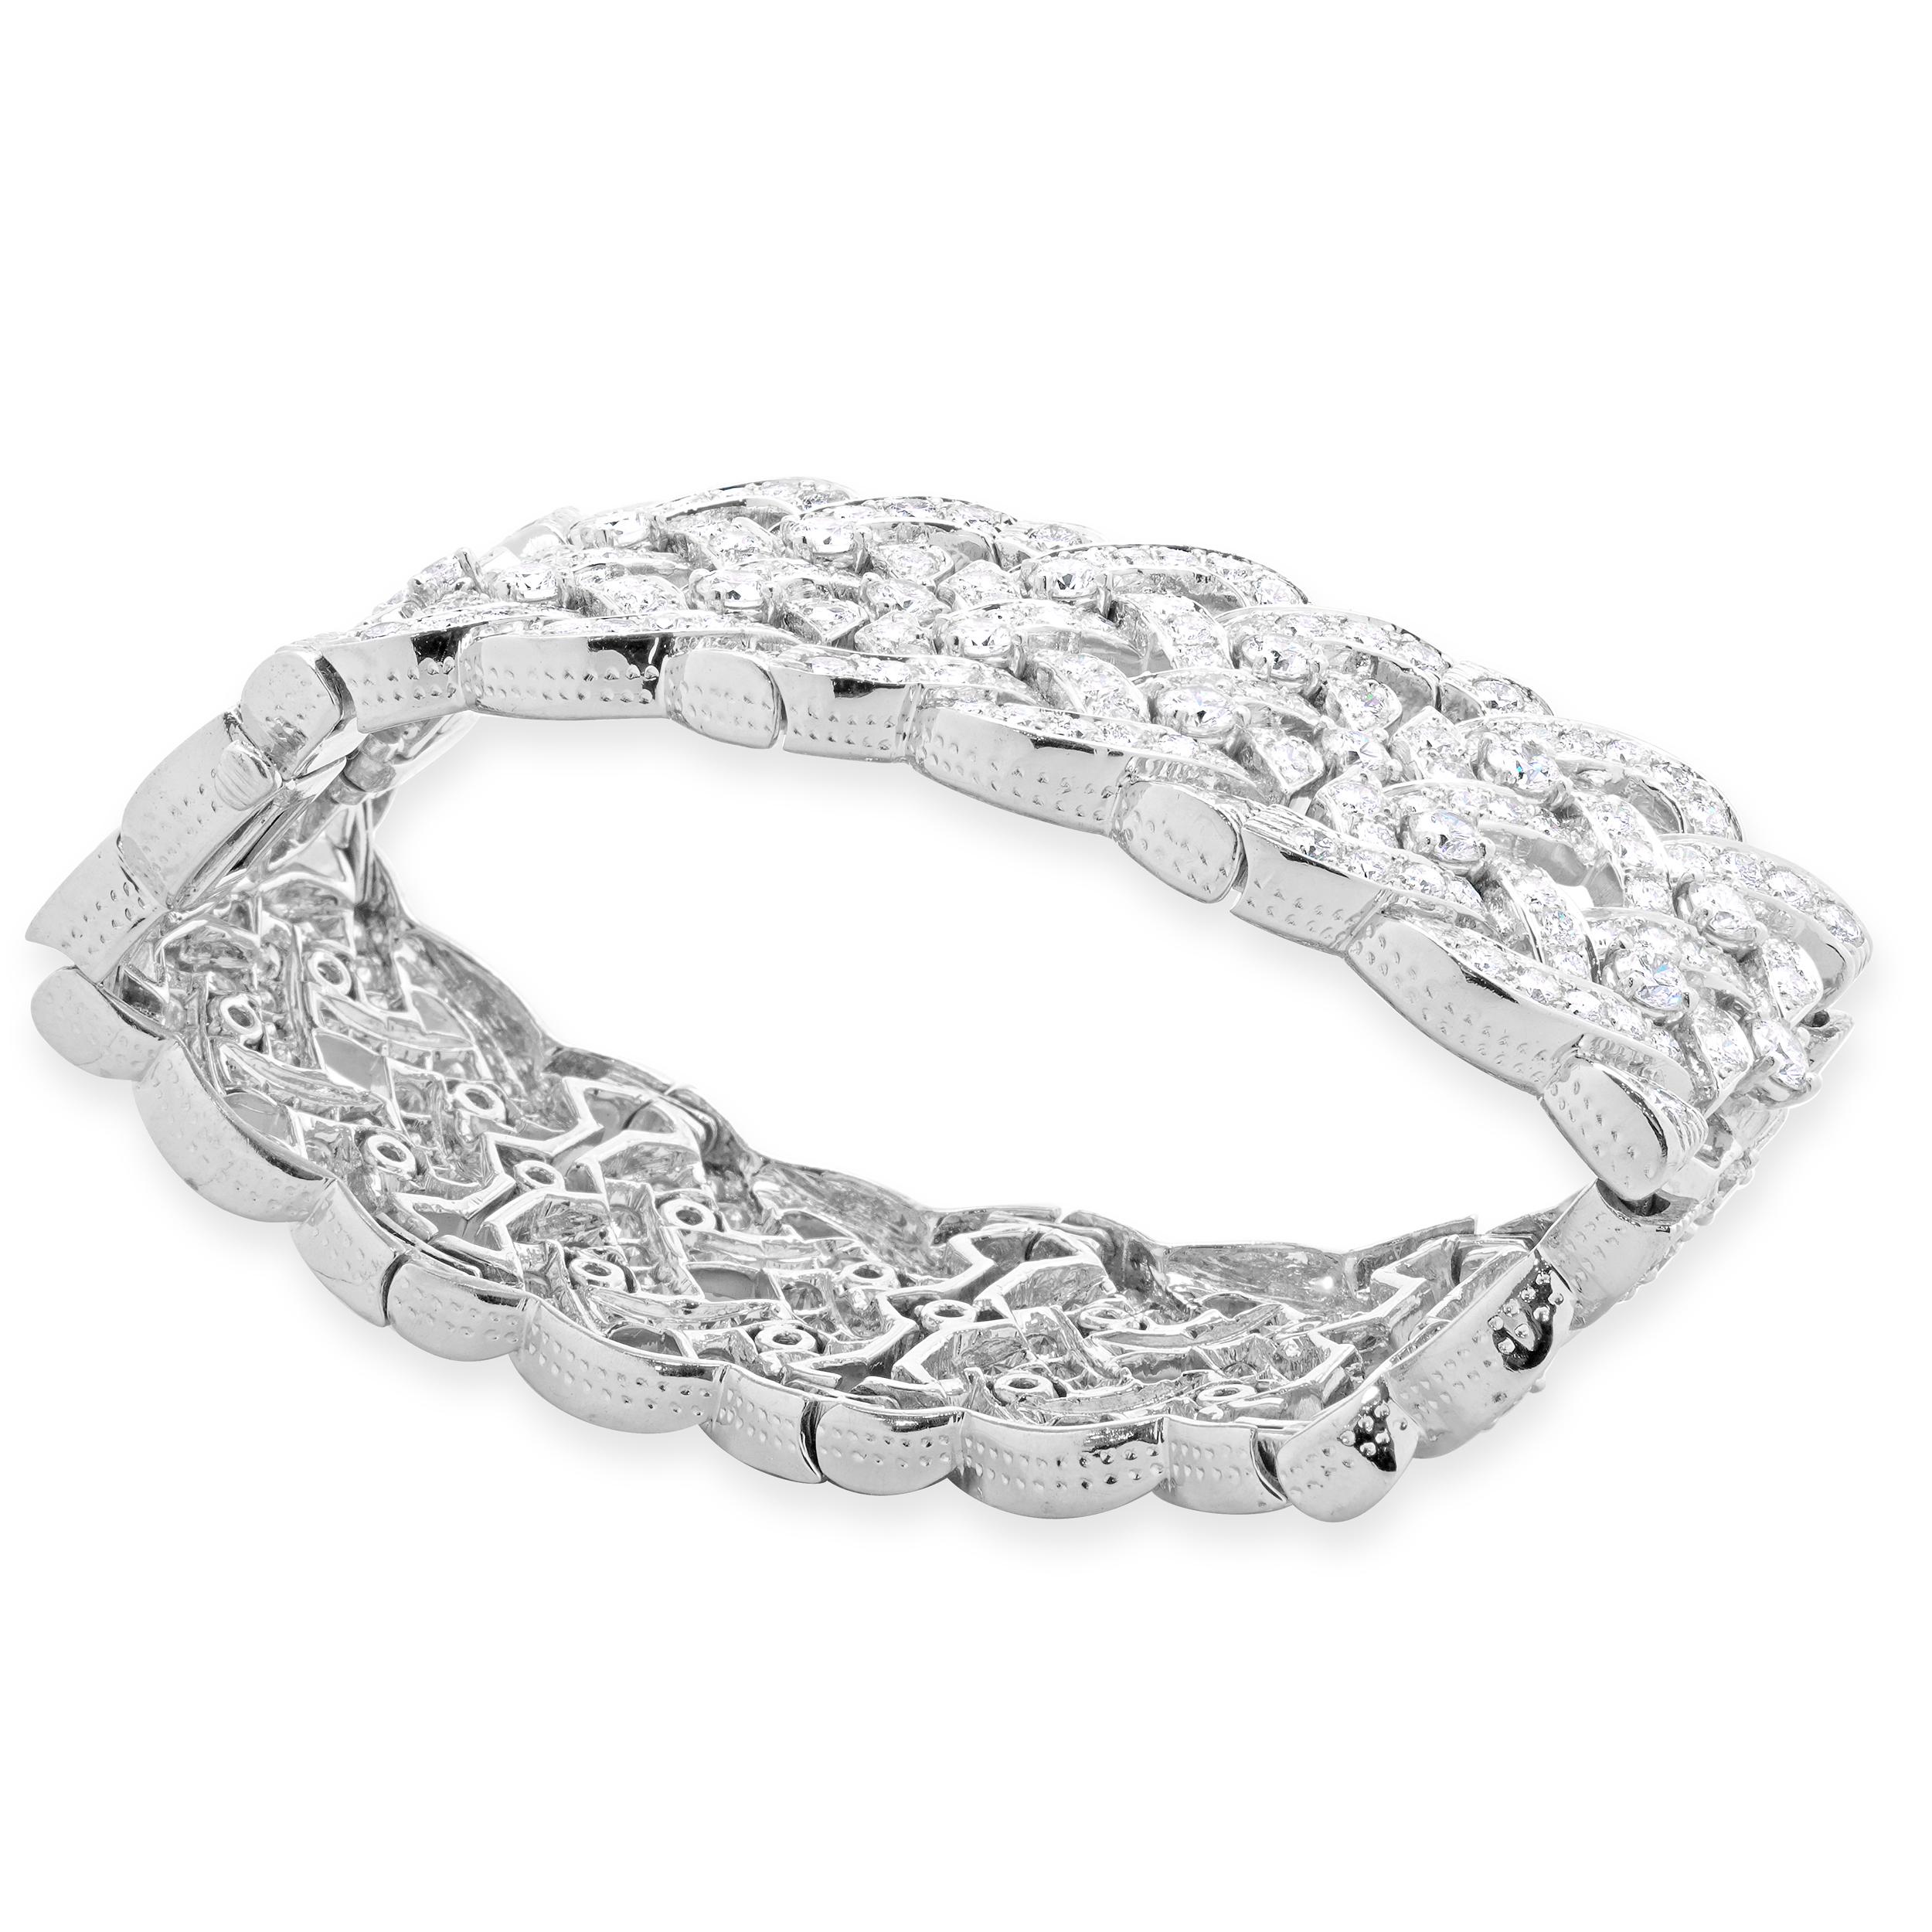 Designer: custom design
Material: platinum
Diamond: 422 round brilliant diamonds= 30.00cttw
Color: G / H
Clarity: VS-SI1
Dimensions: bracelet will fit up to a 6-inch wrist
Weight: 141 grams